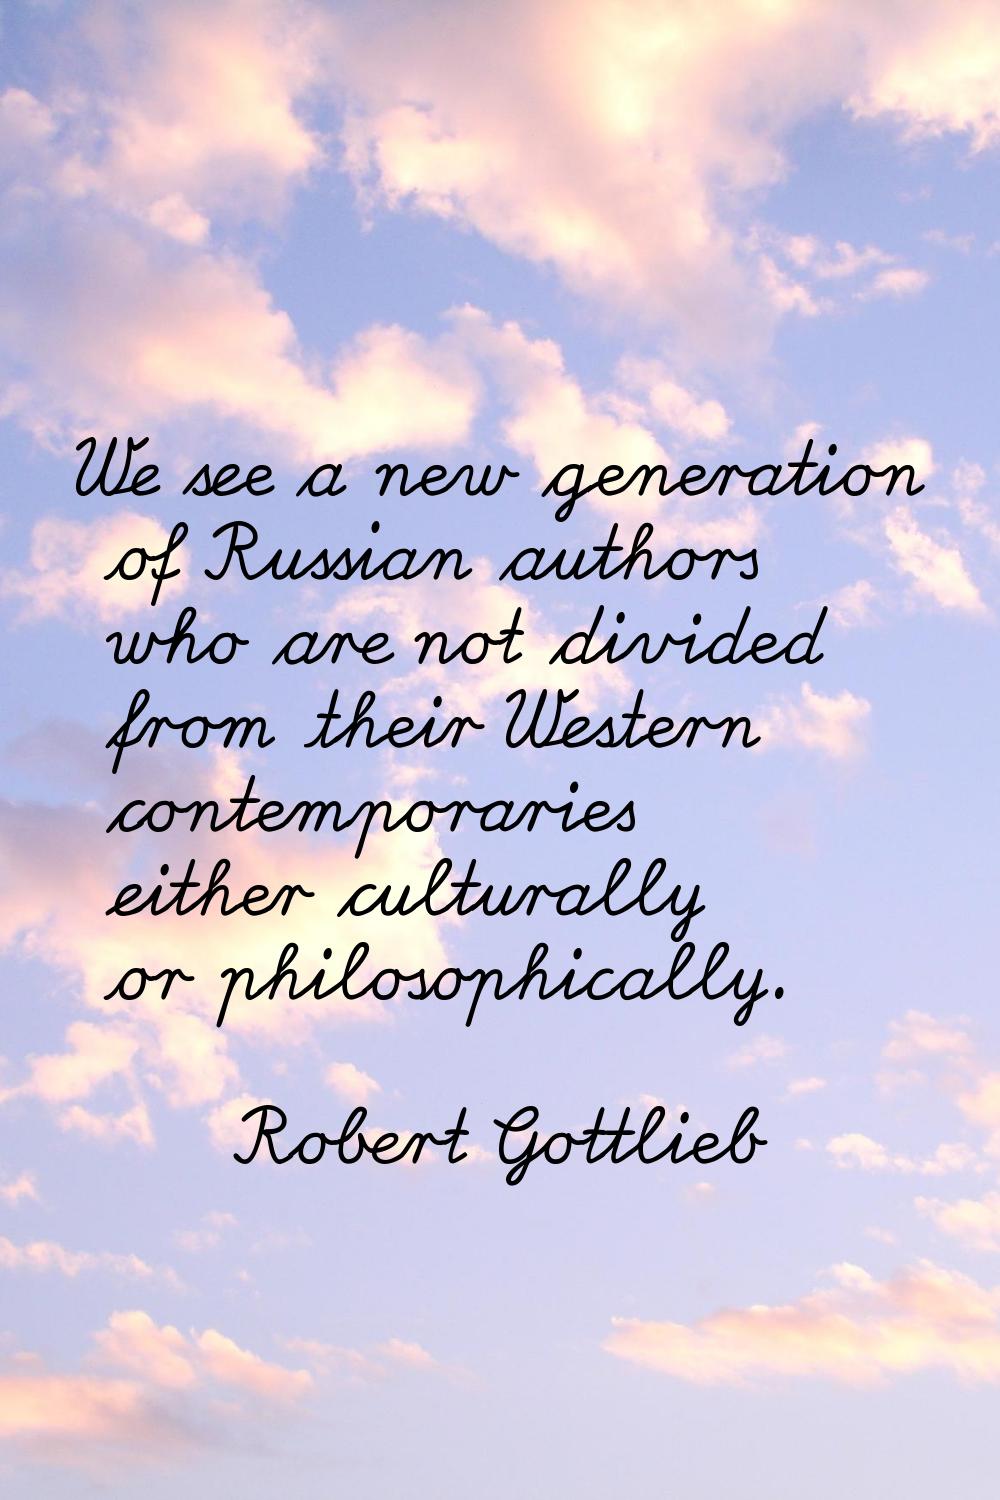 We see a new generation of Russian authors who are not divided from their Western contemporaries ei